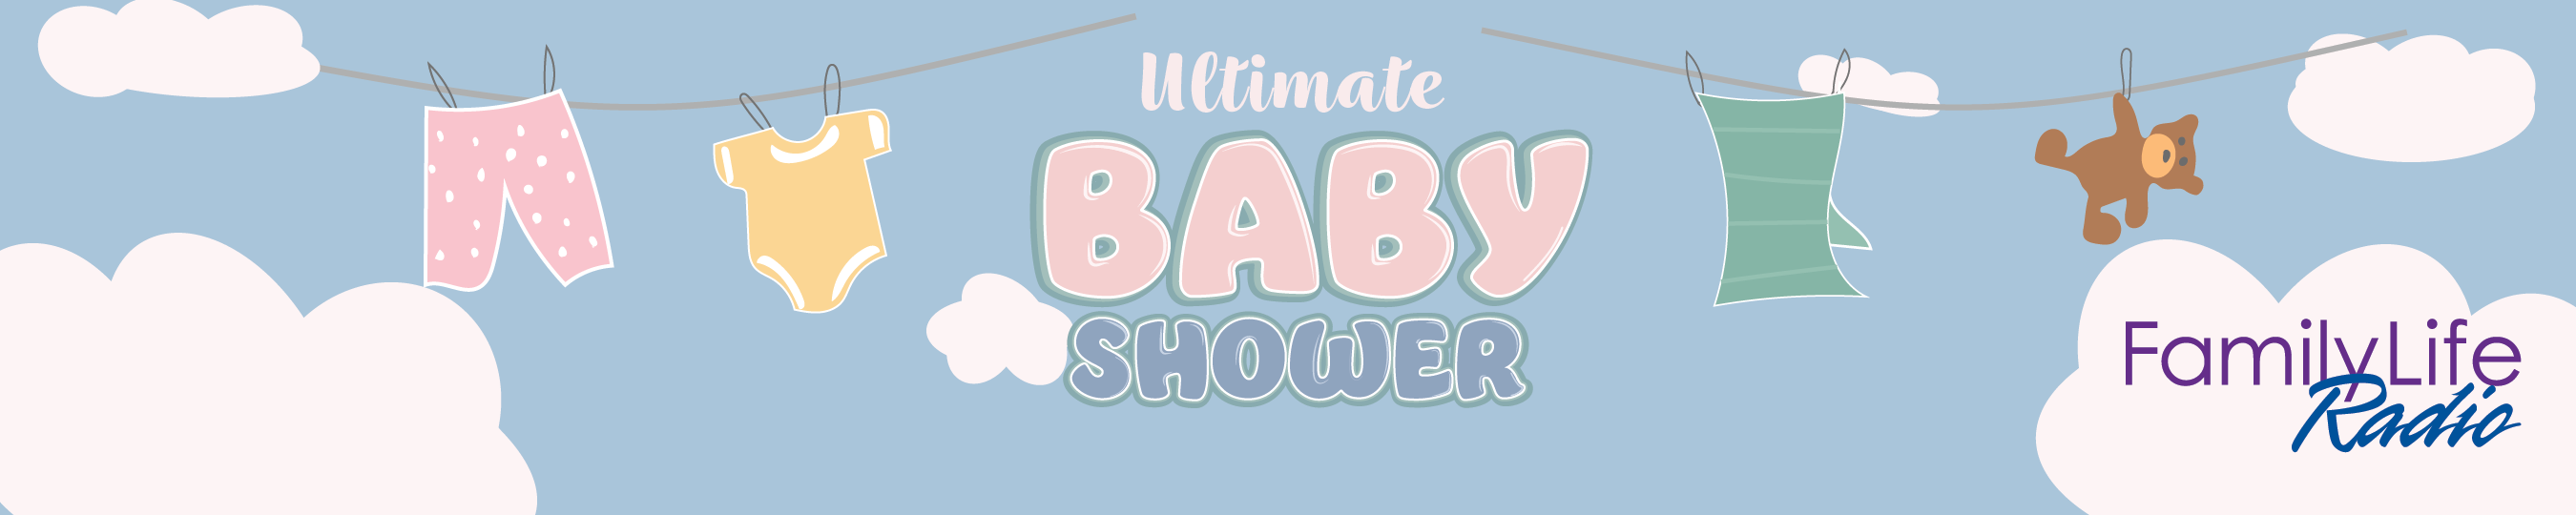 Ultimate Baby Shower